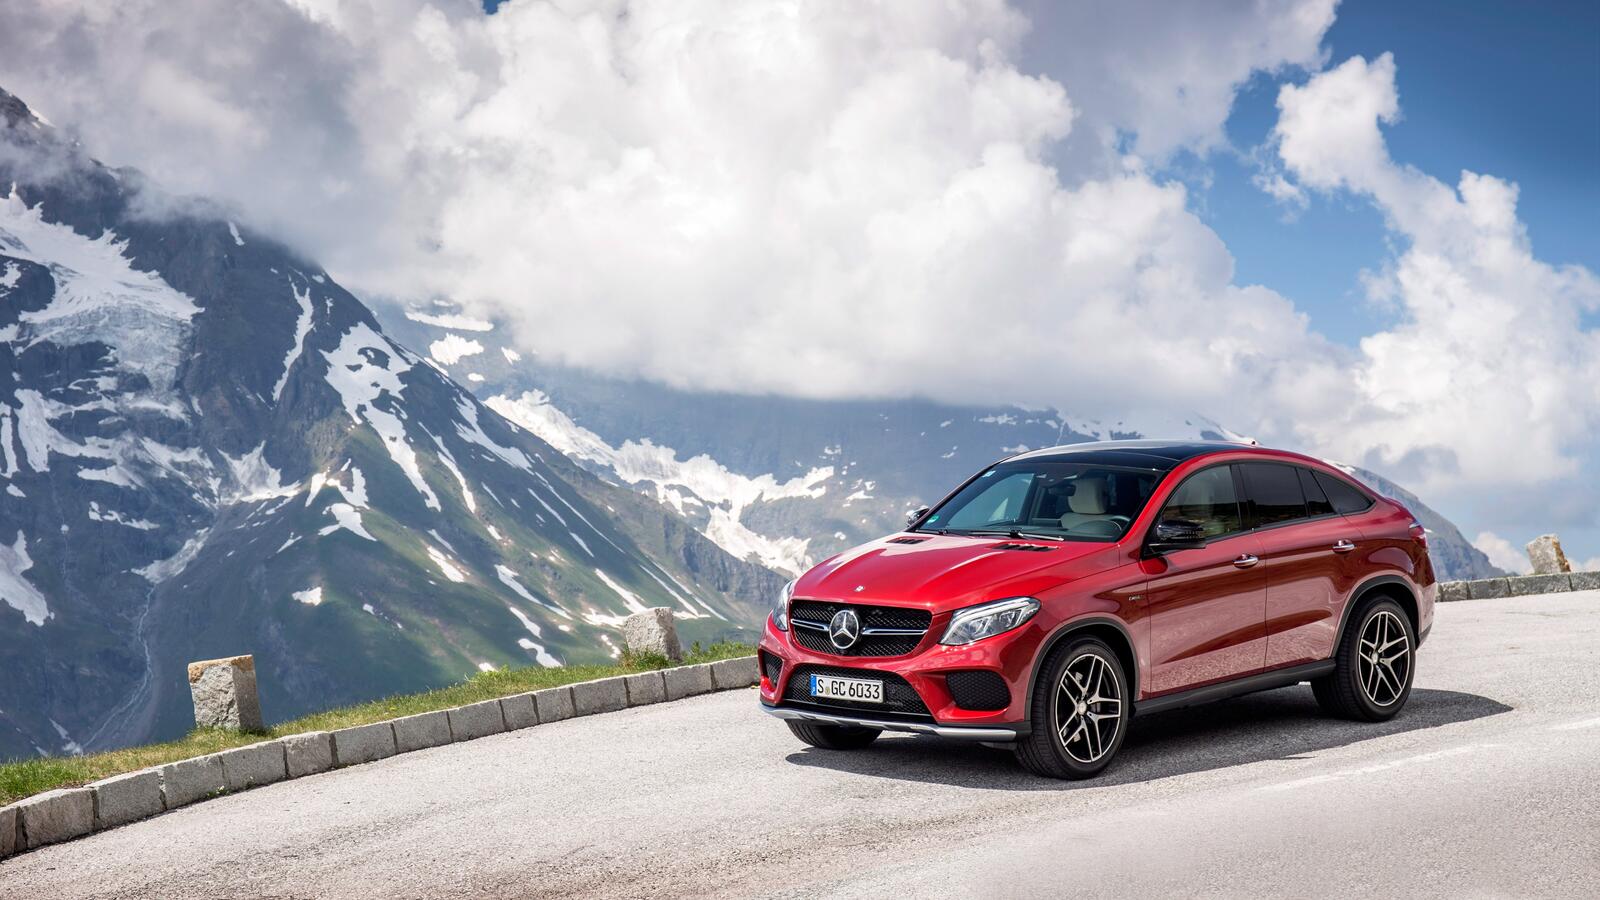 Free photo A red Mercedes Benz gle 450 against a backdrop of snowy mountains.